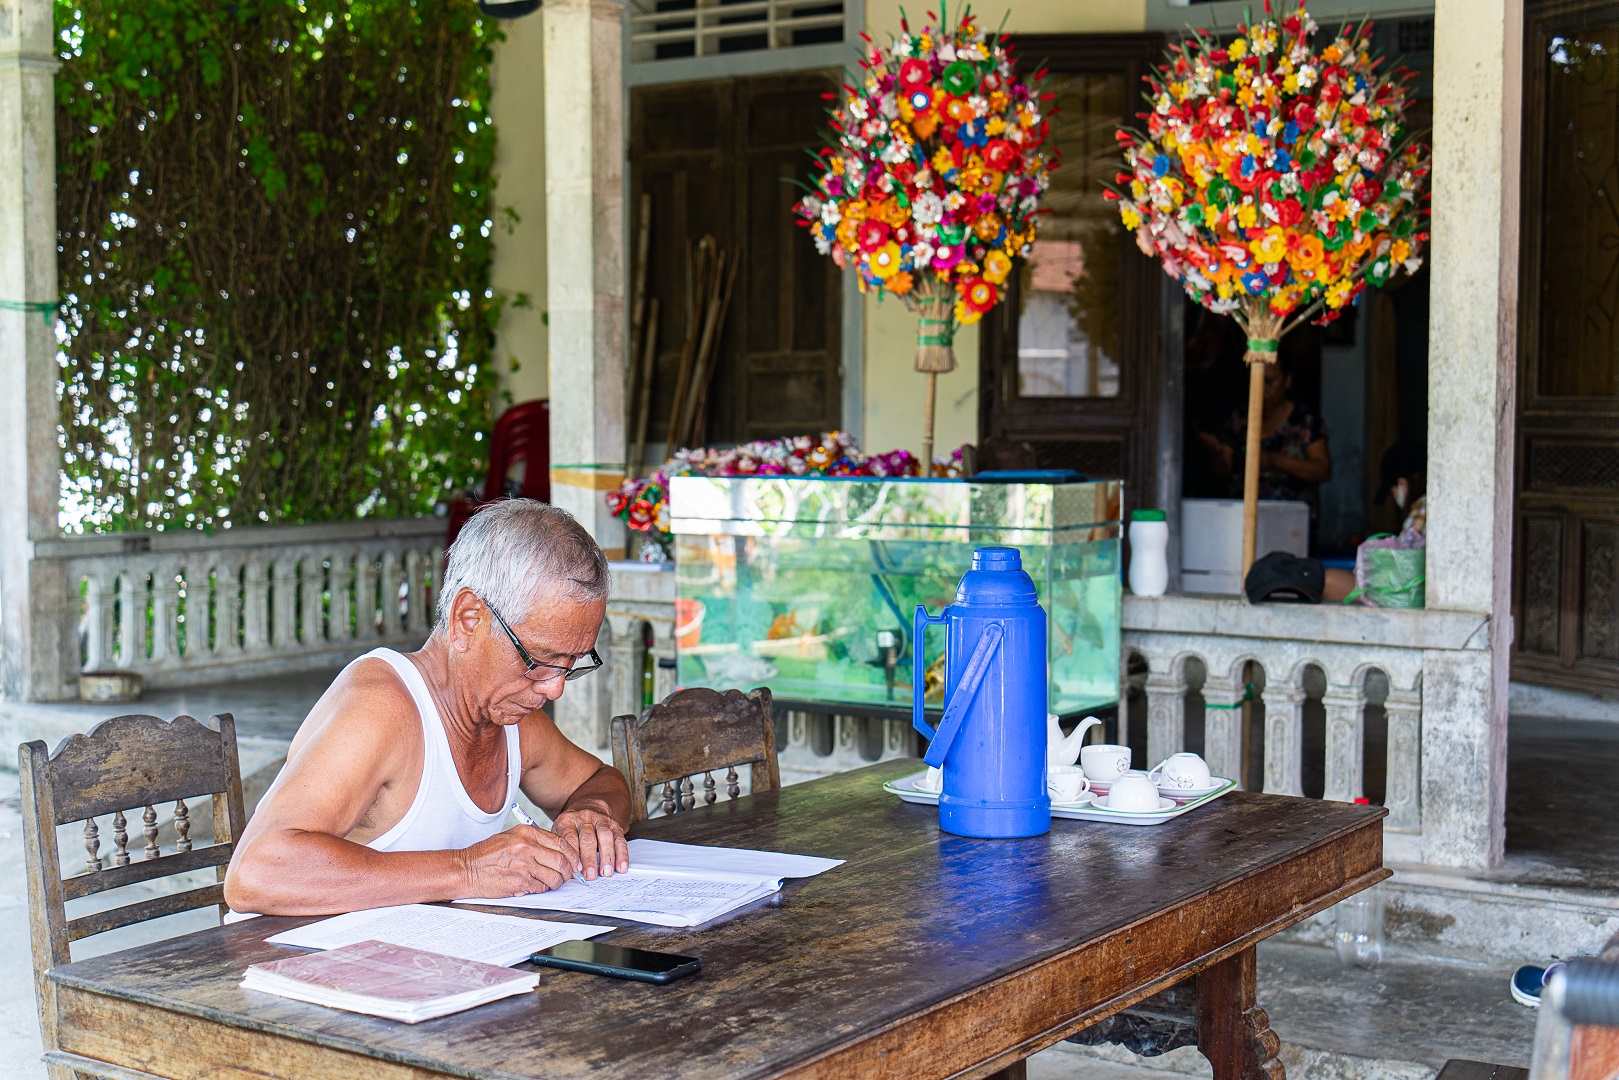 Artisans in the village are friendly and hospitable. They are willing to instruct visitors to make paper flowers and share their stories during the journey of making paper flowers. Photo: Nguyen Trung Au / Tuoi Tre News